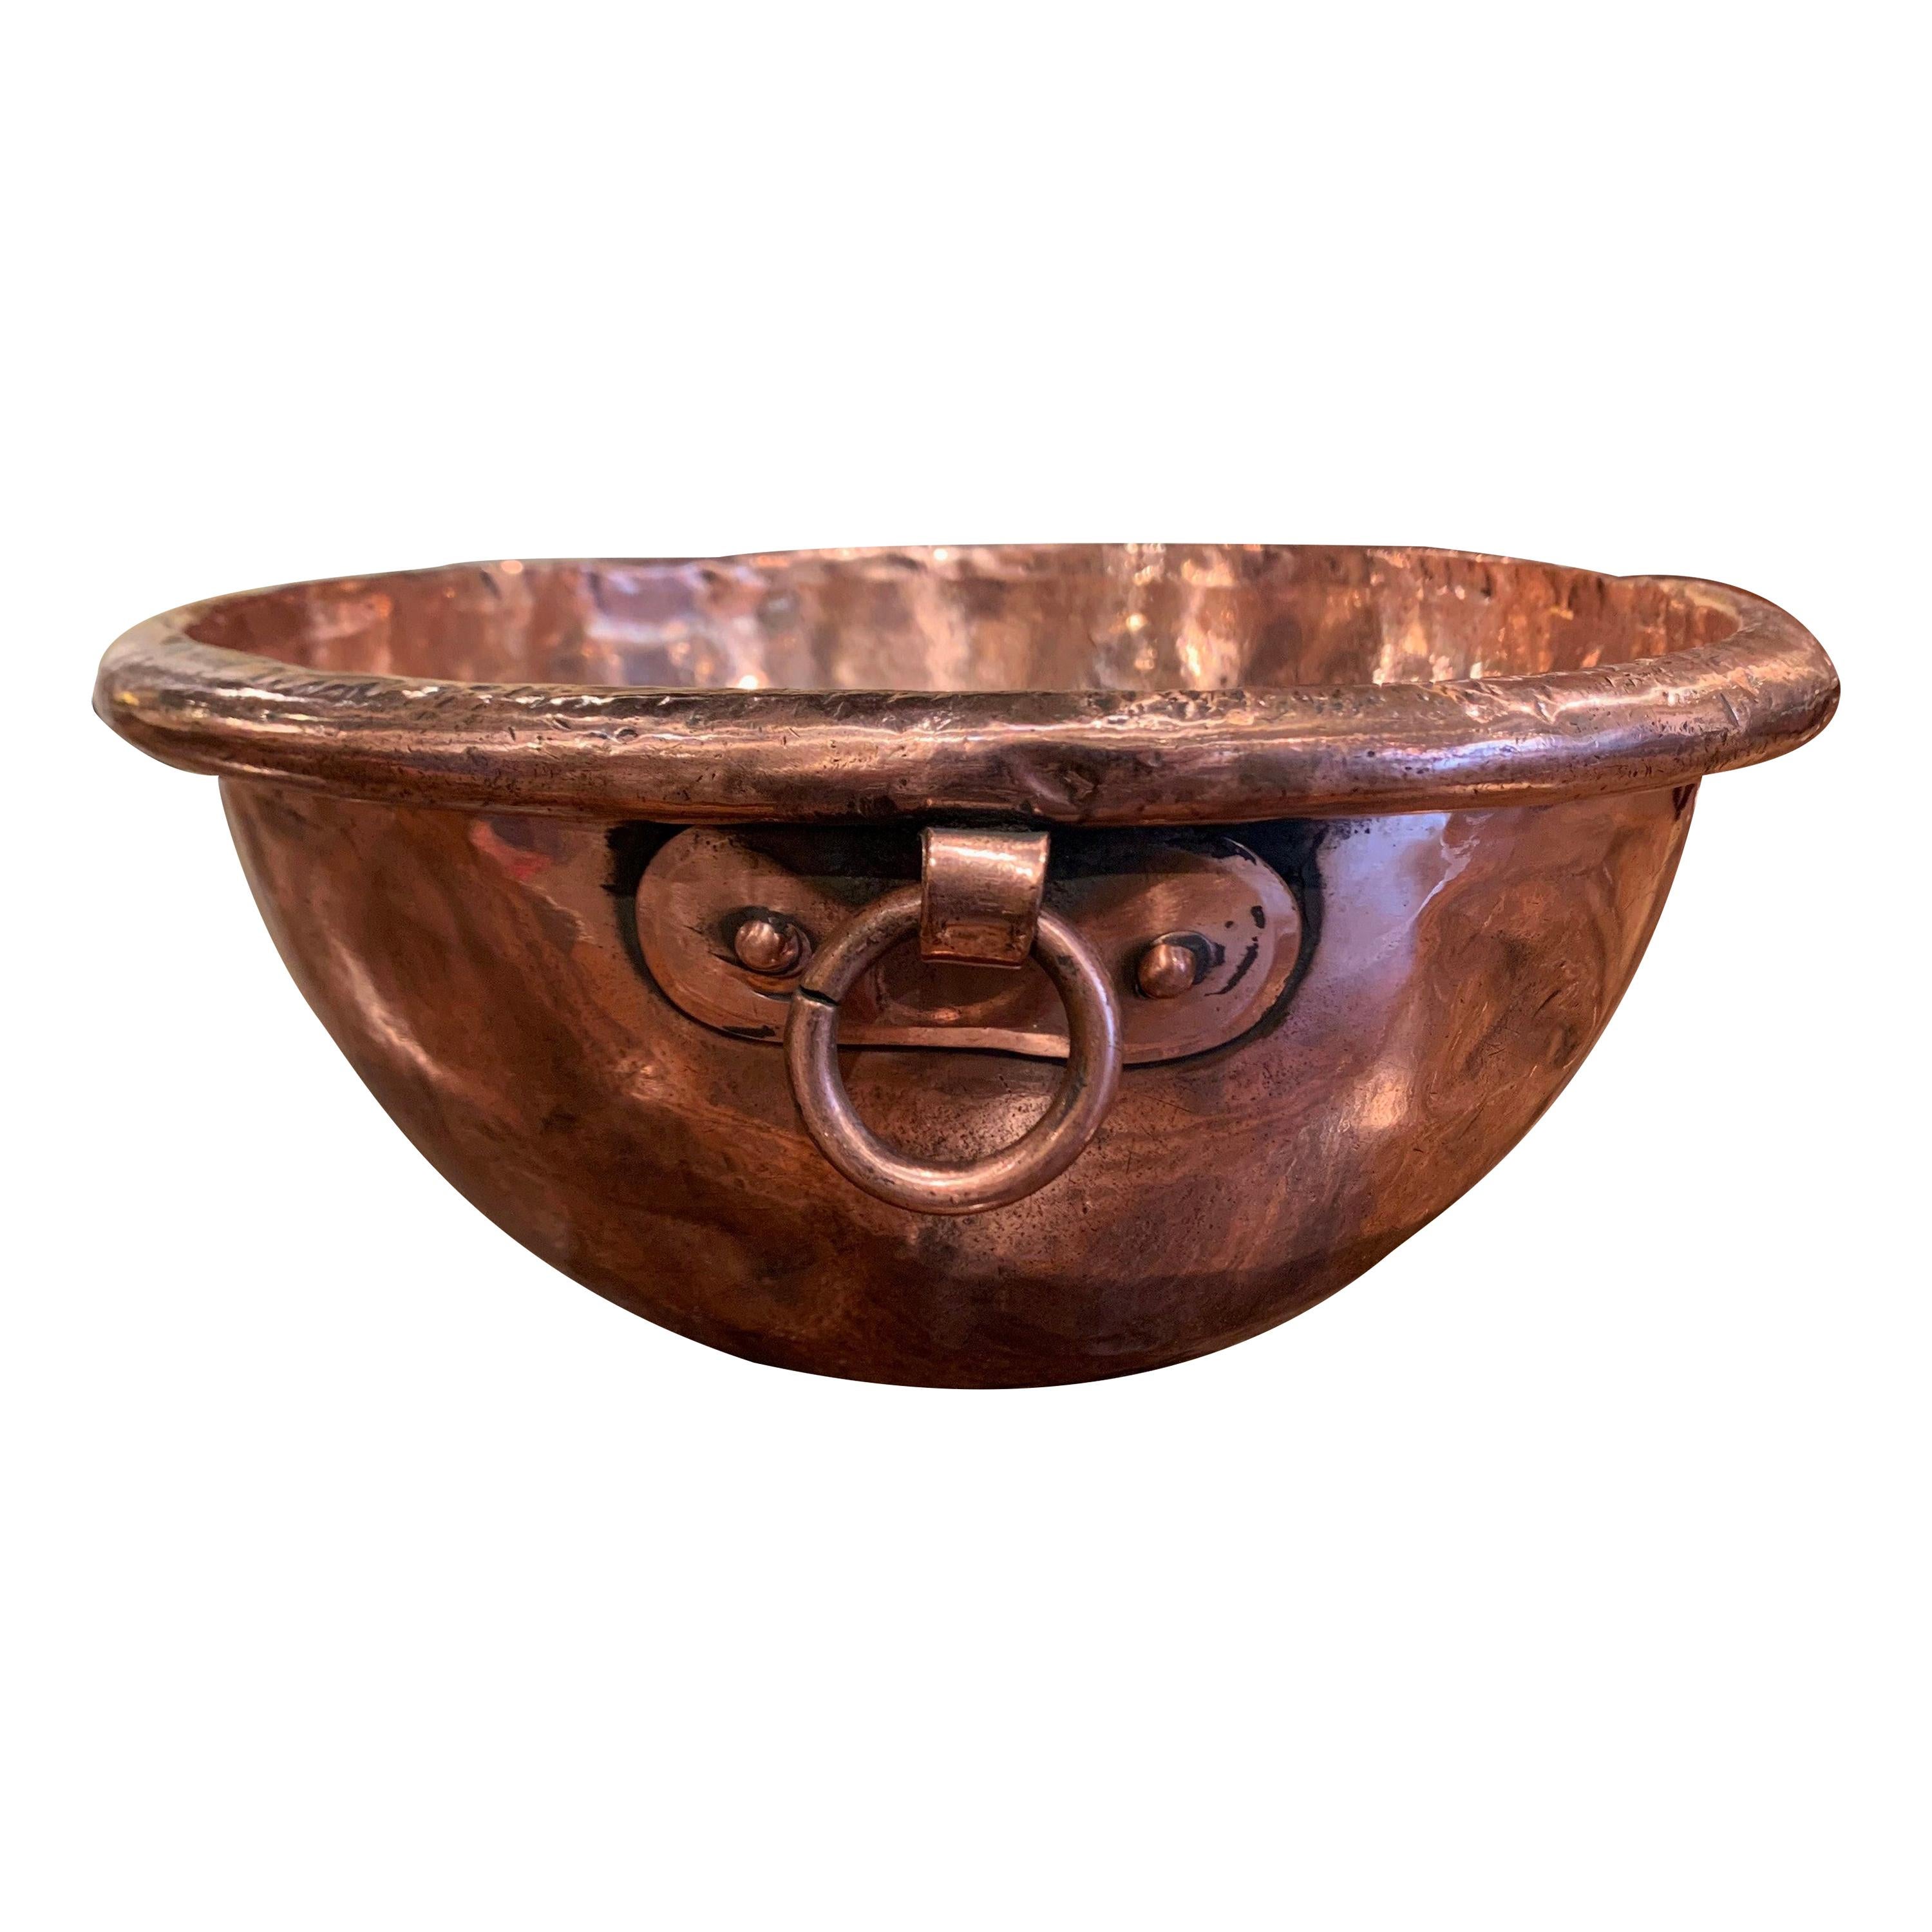 18th Century French Copper Jelly Bowl from Normandy